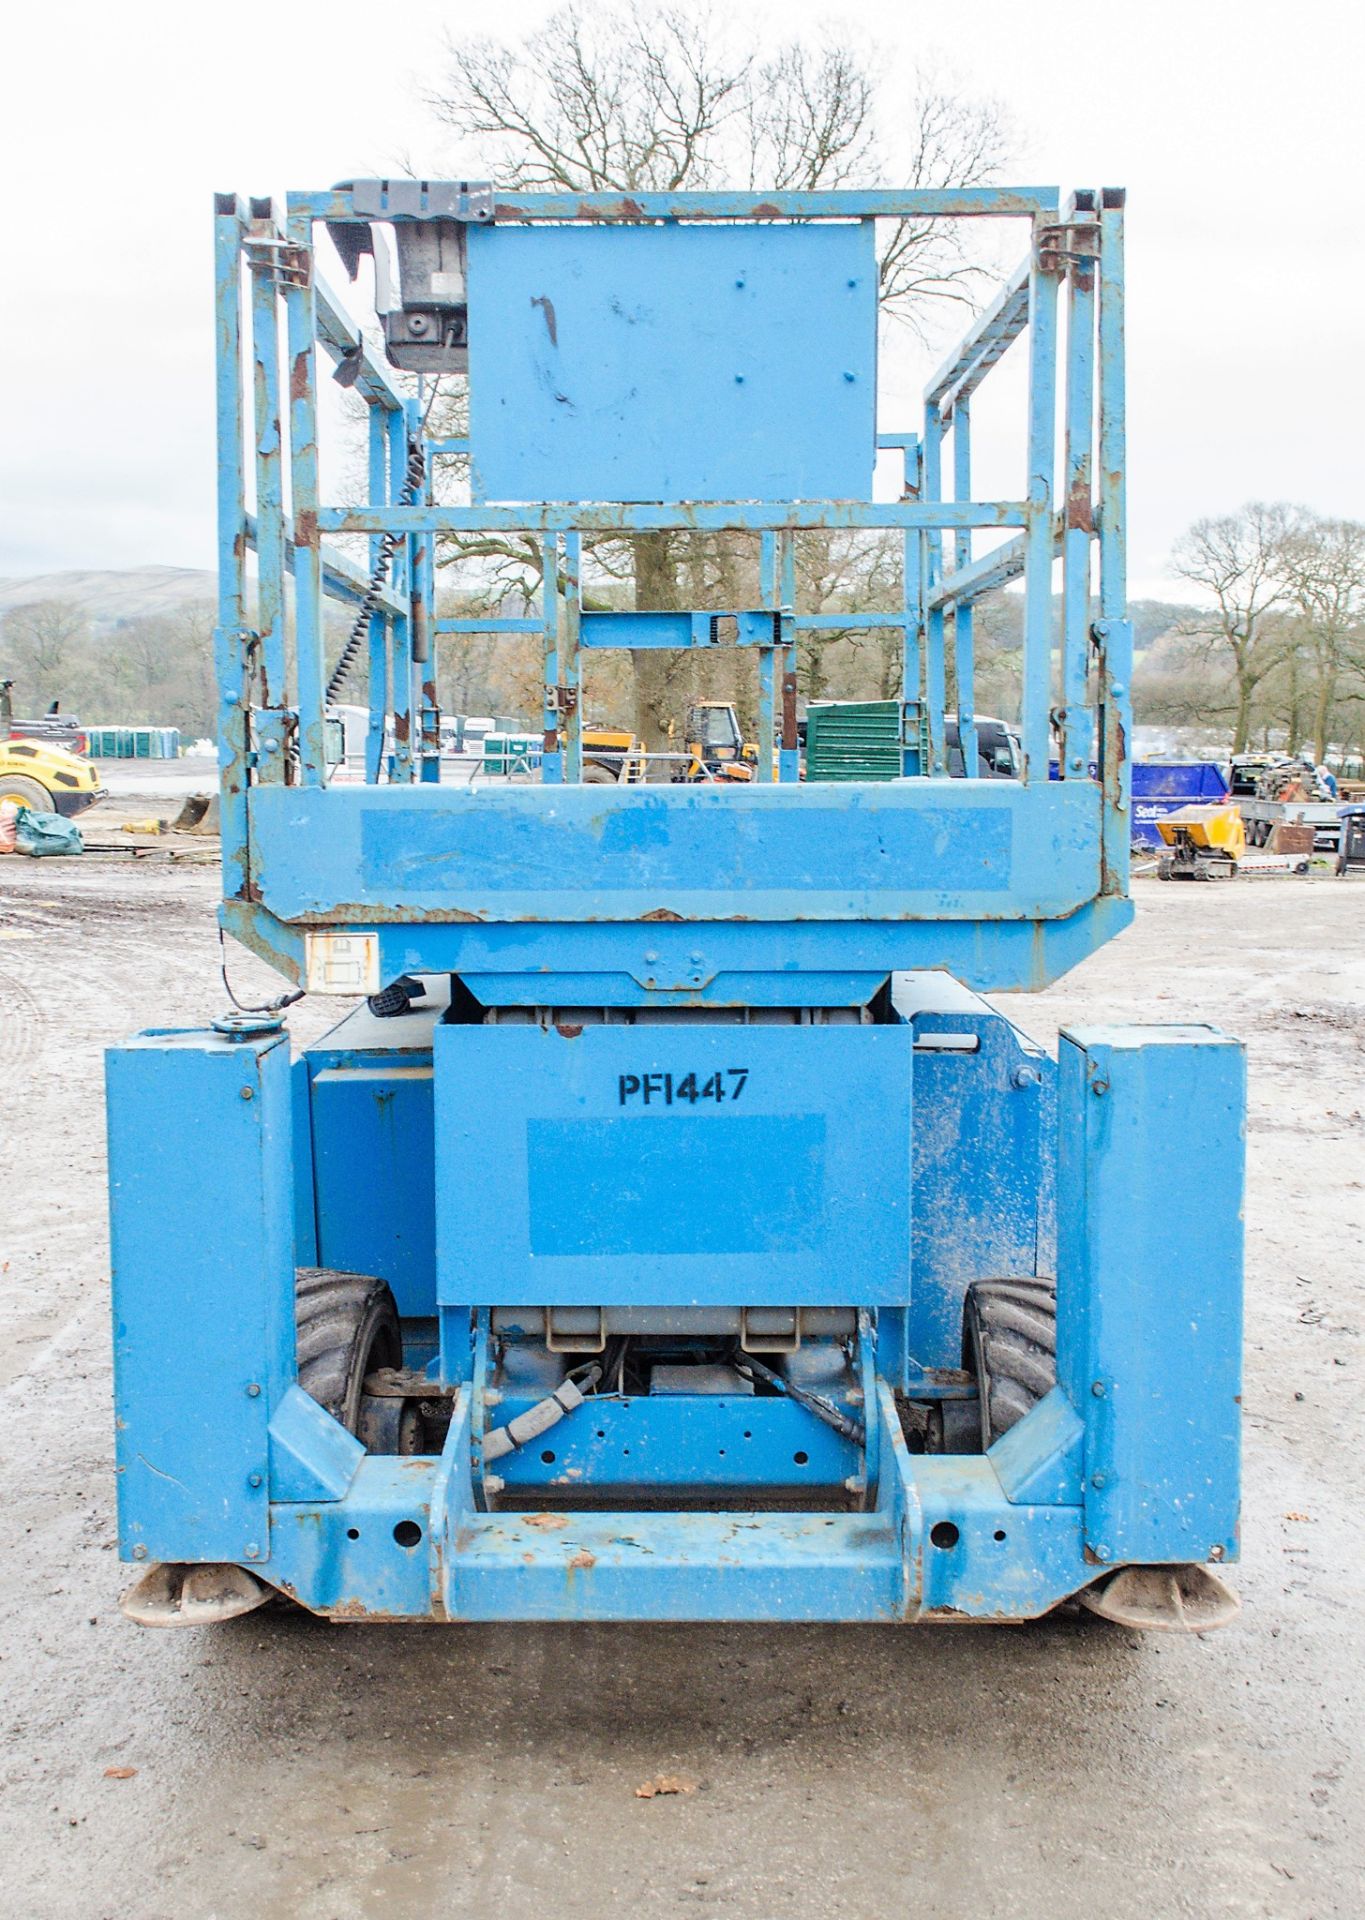 Genie GS3268RT diesel driven rough terrain fork lift truck Year: 2009 S/N: 52720 Recorded Hours: - Image 6 of 11